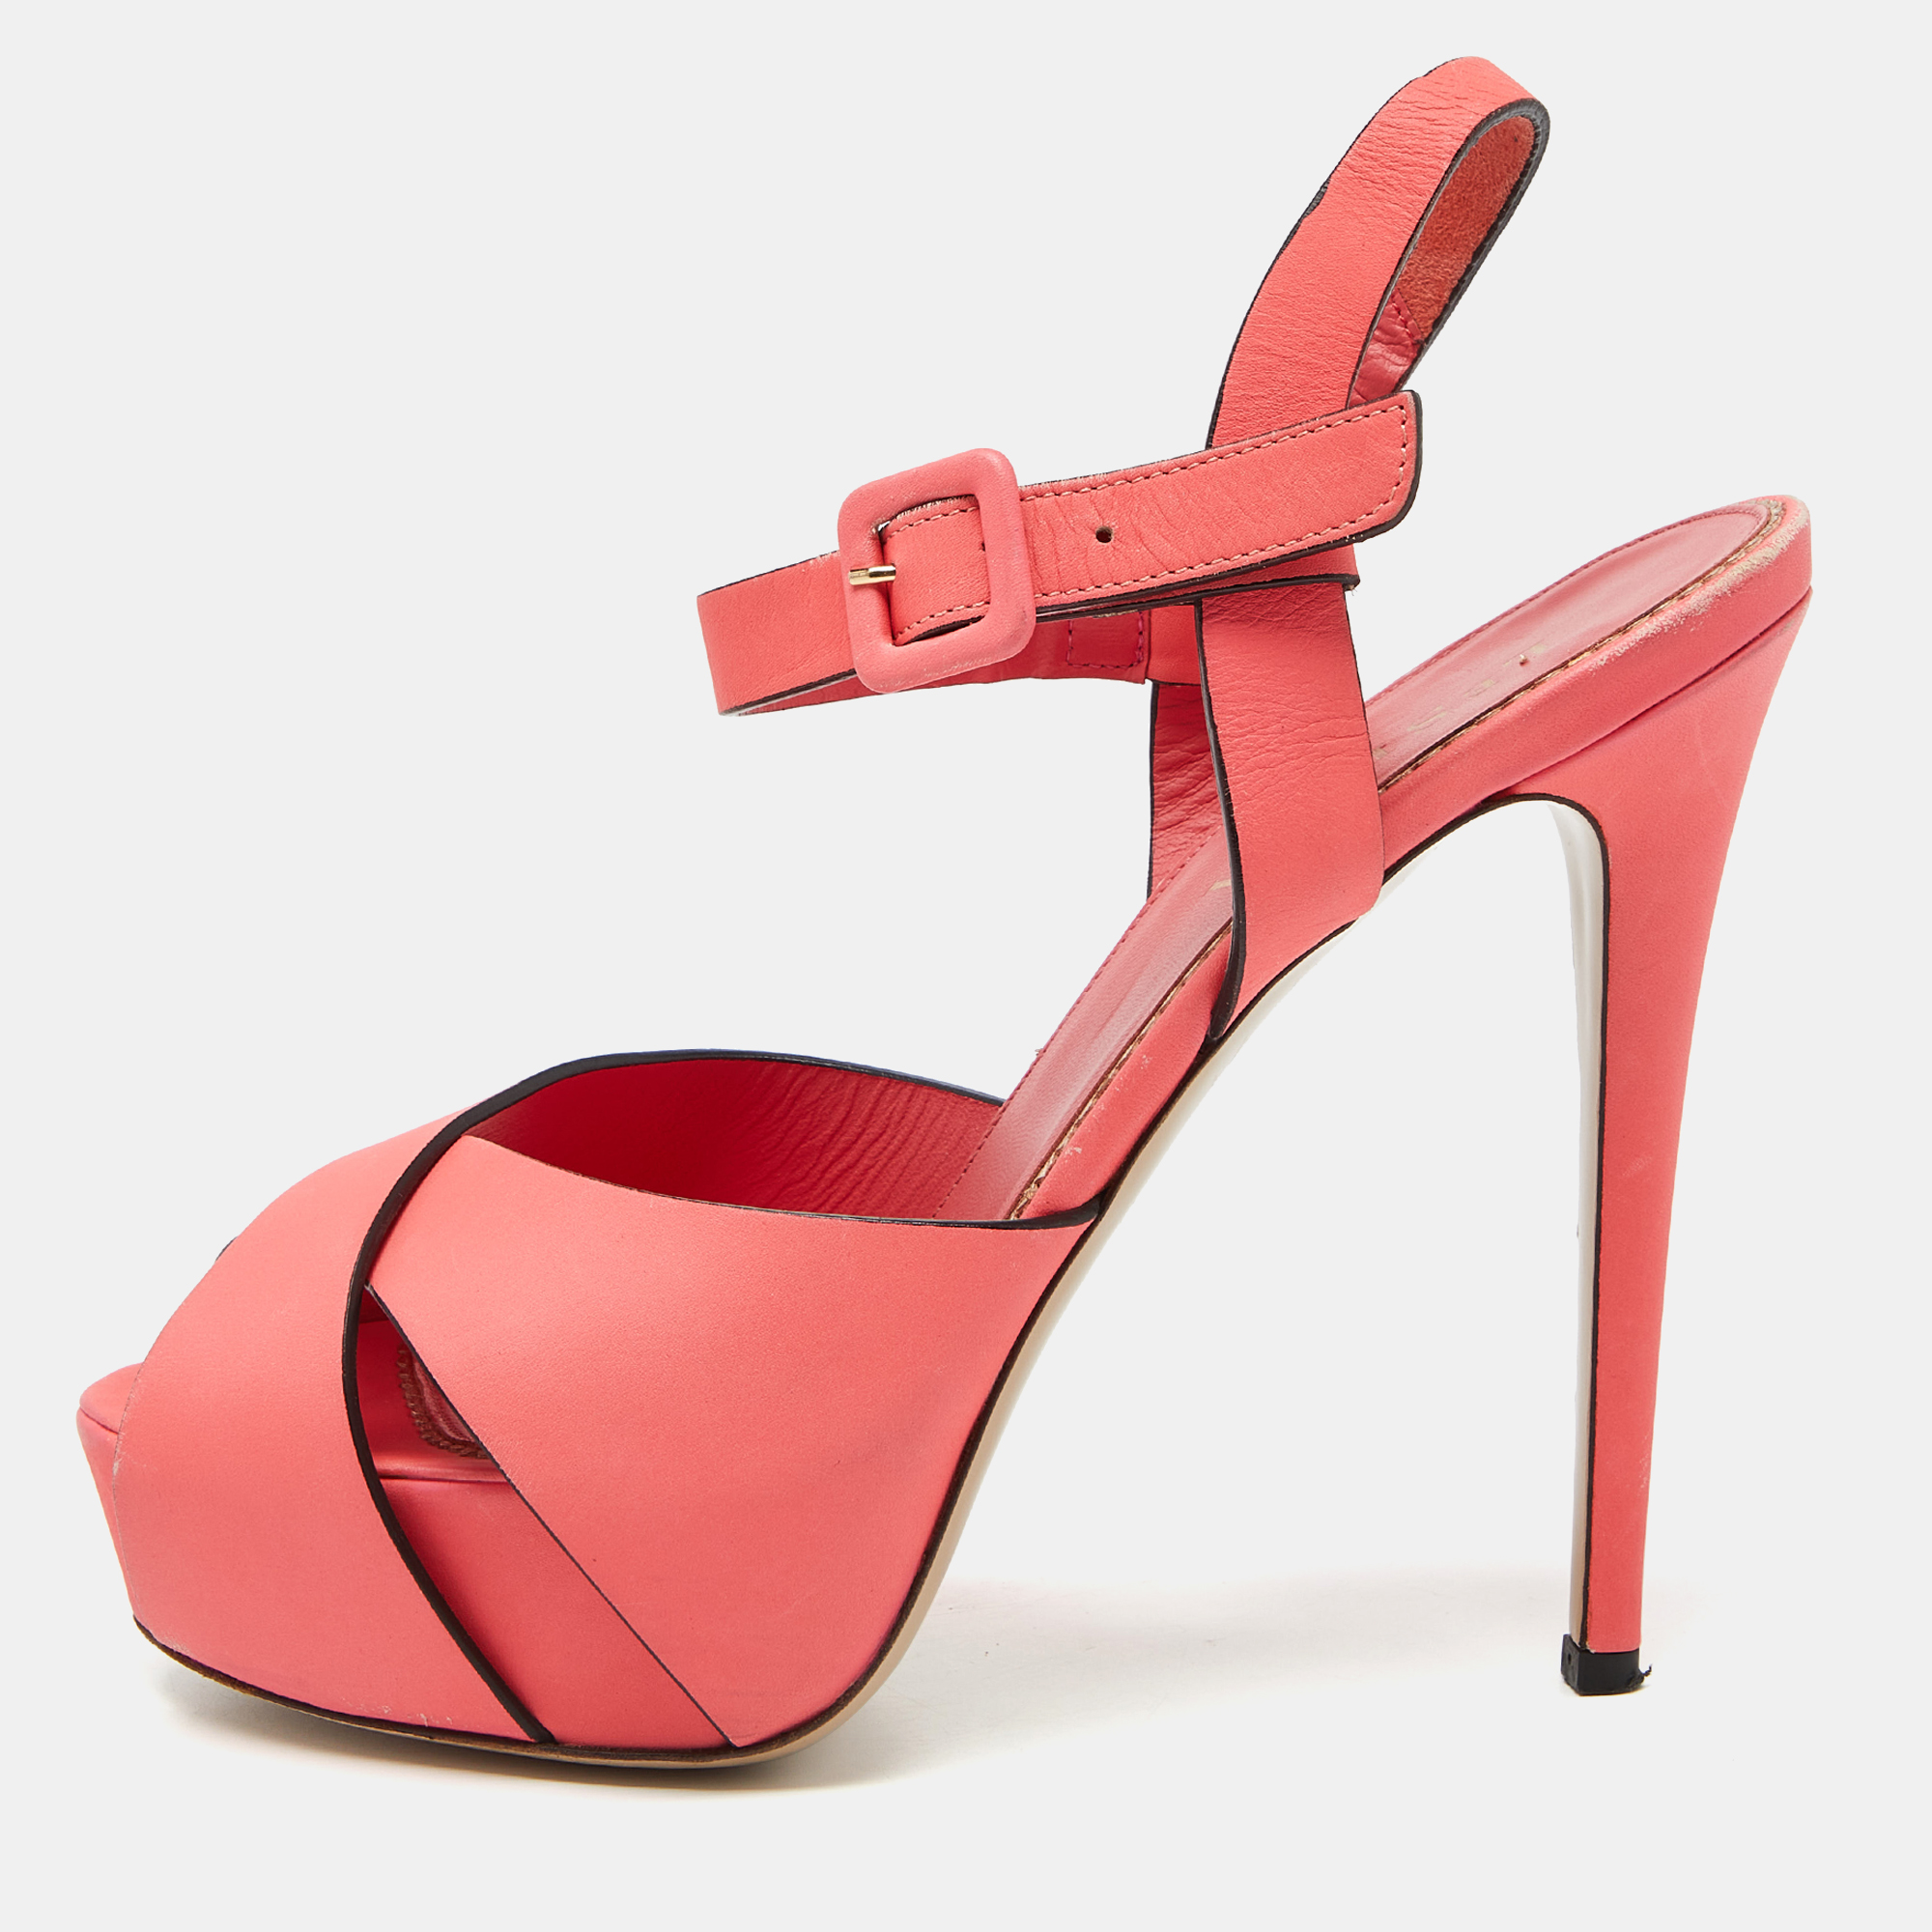 Deliver statement looks with these sandals from Le Silla From their shape and detailing to their overall appeal they exude sophisticated style. The sandals come crafted from coral pink leather and are added with simple buckle closures and high heels.